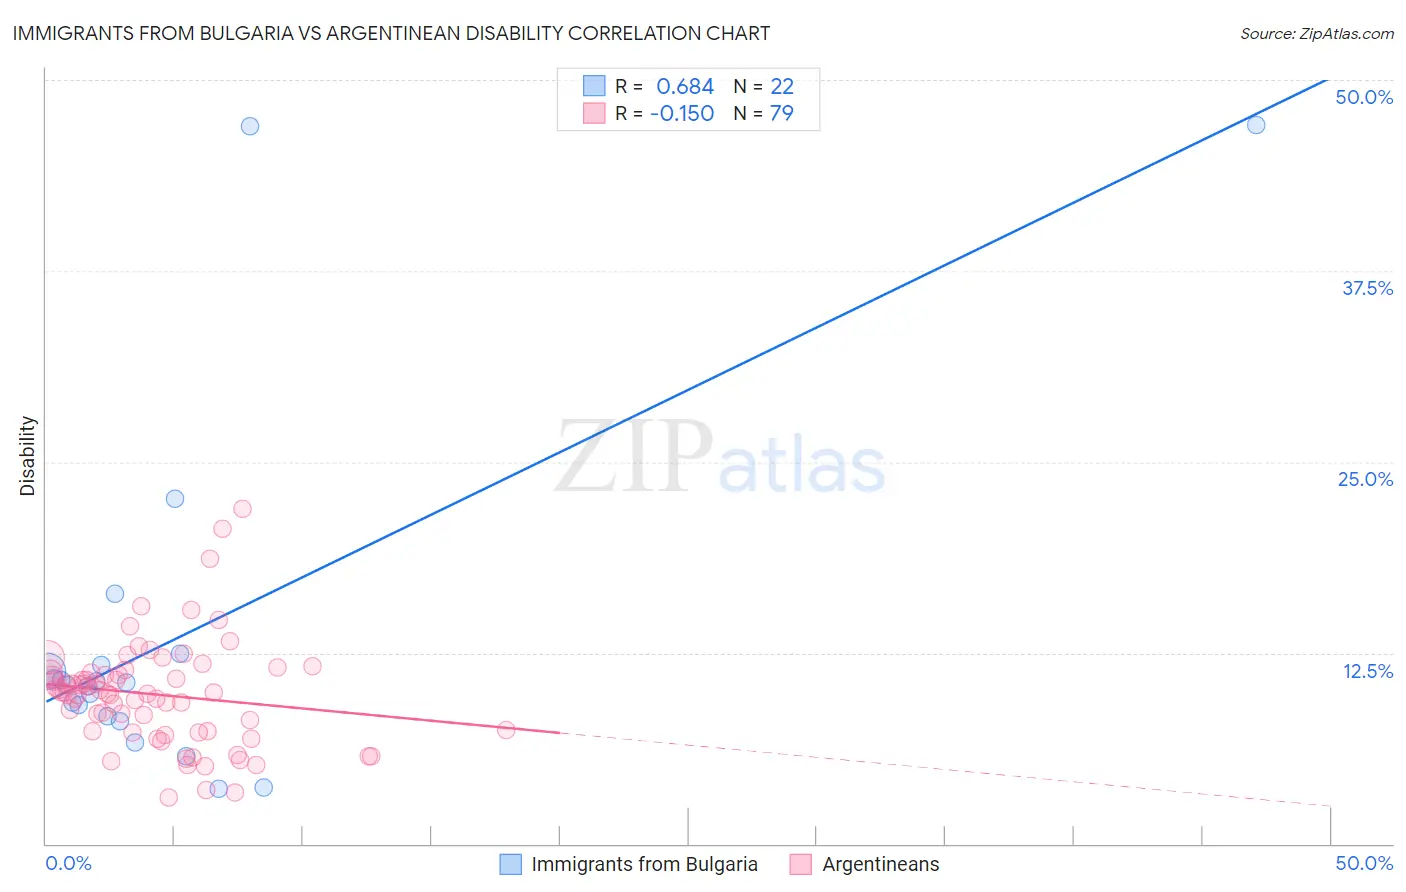 Immigrants from Bulgaria vs Argentinean Disability